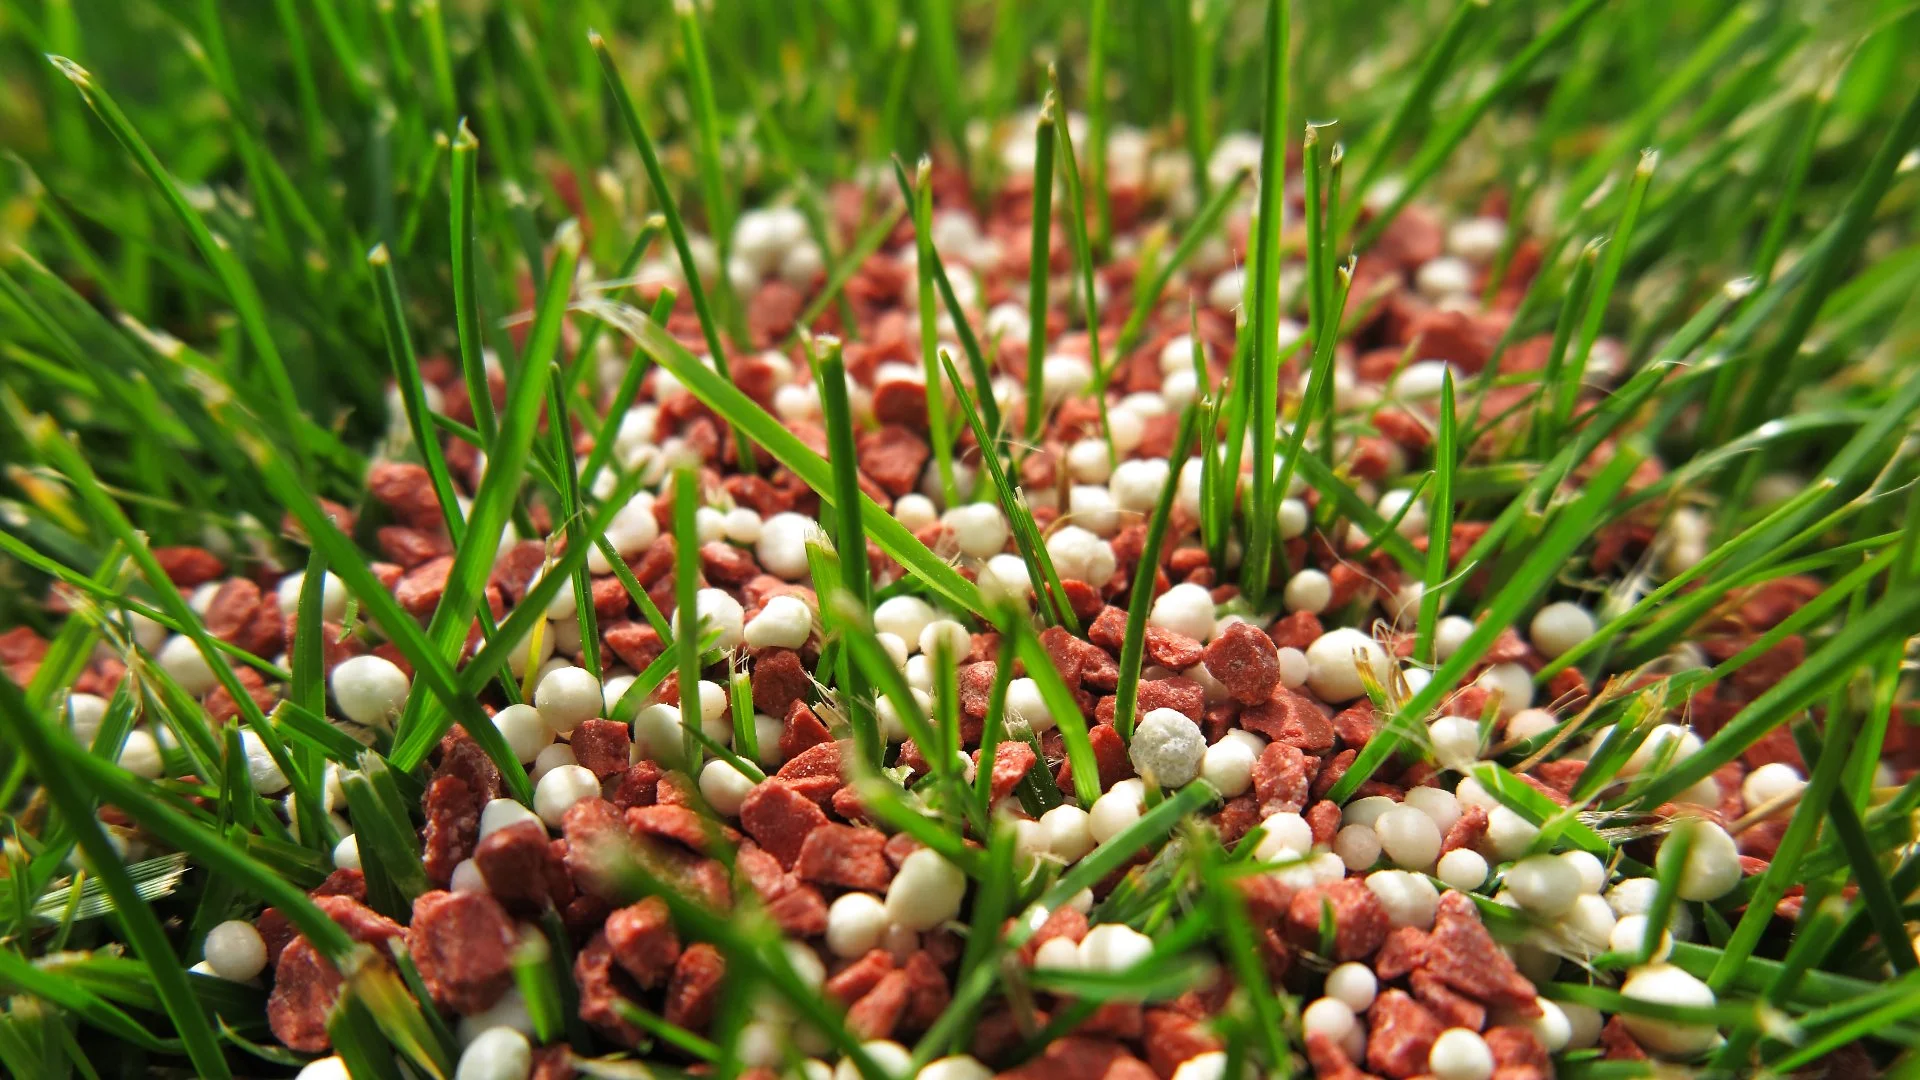 What Nutrients Are in Lawn Fertilizers & How Do They Help Your Grass?